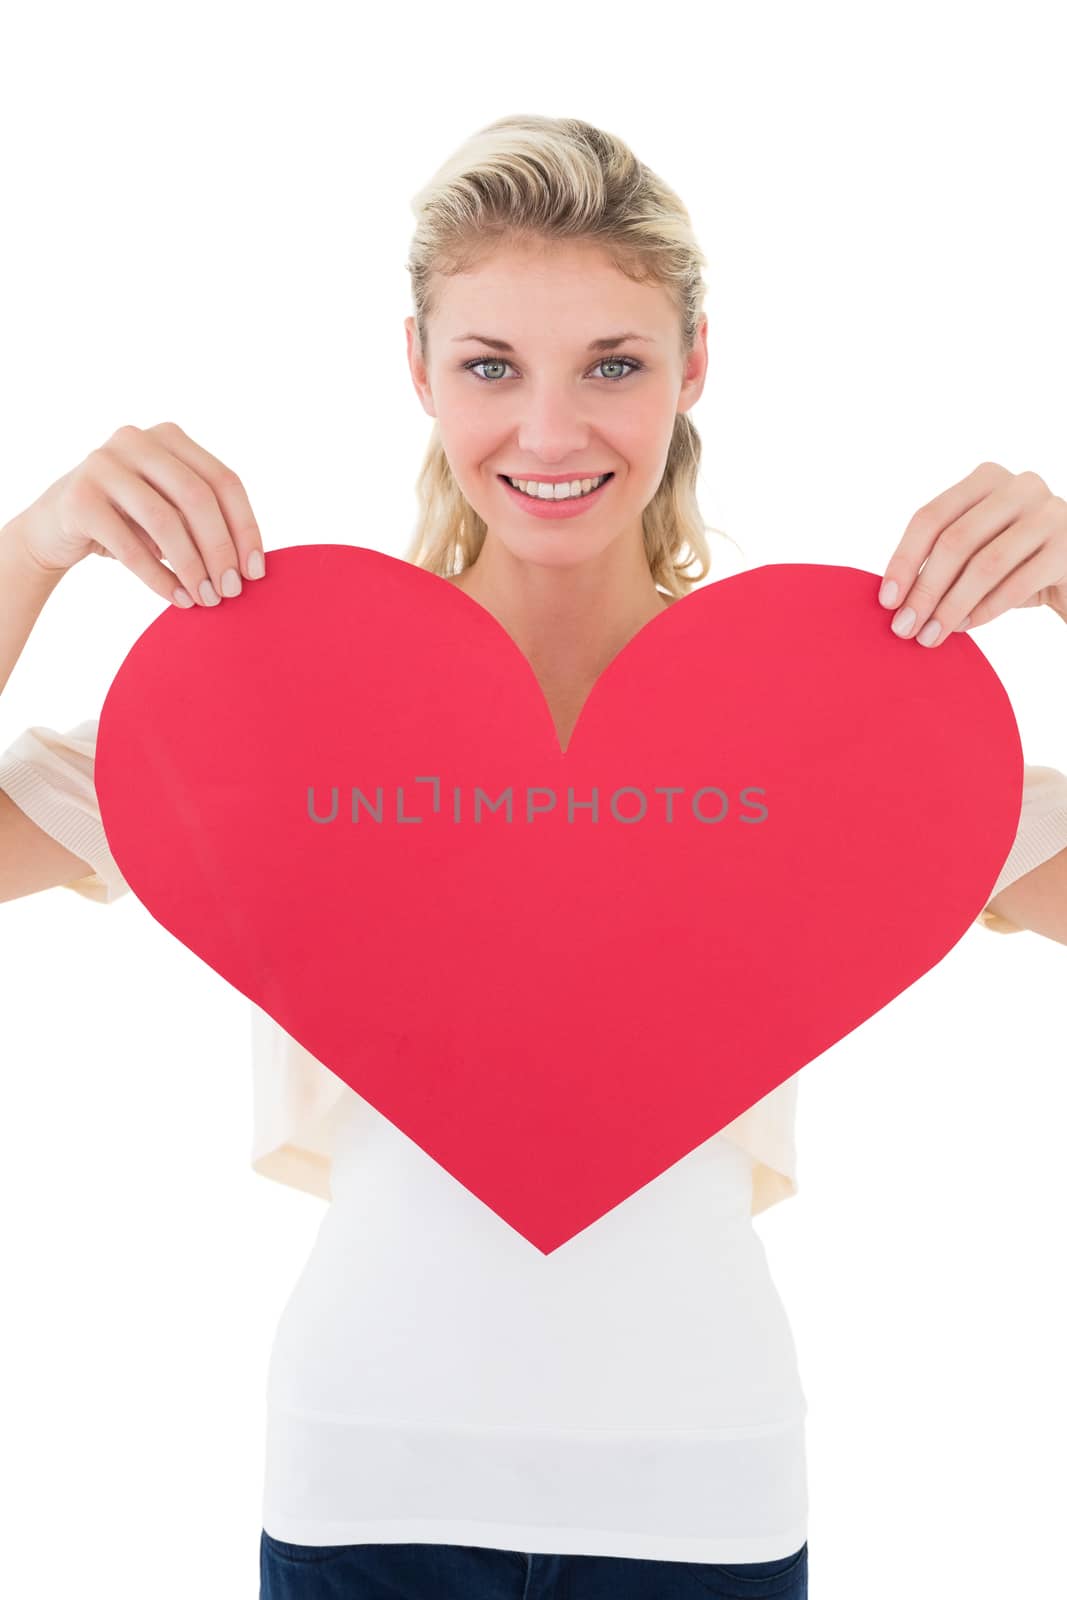 Portrait of smiling young woman holding heart over white background